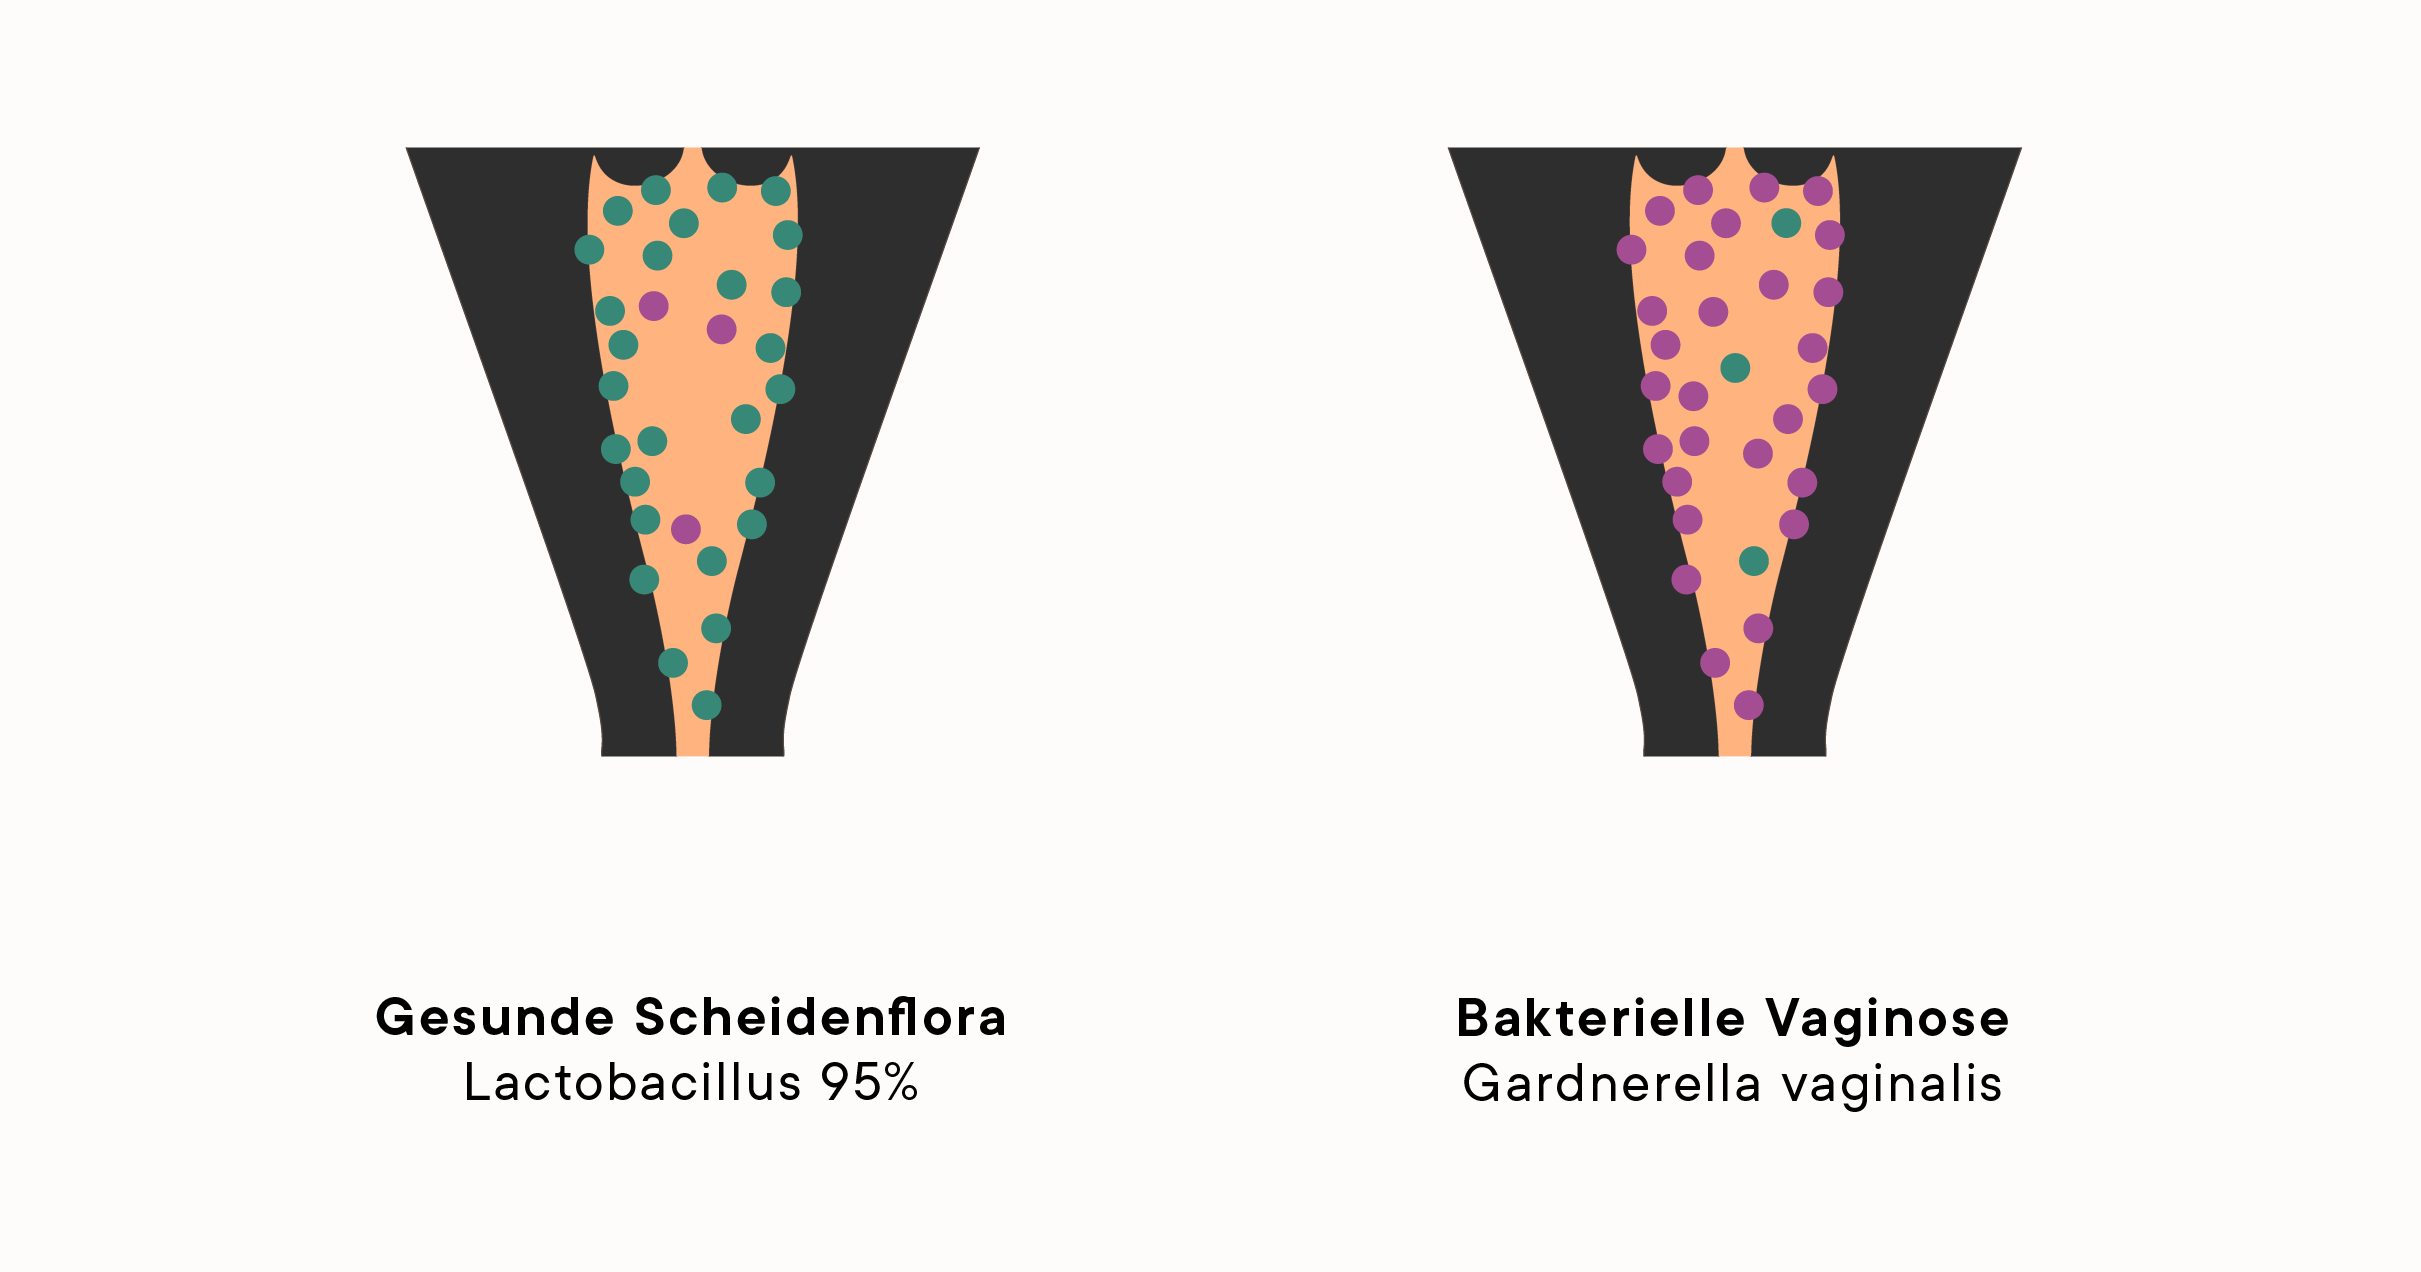 comparative illustration of two vaginal muscoa, one healthy and one with bacterial vaginosis